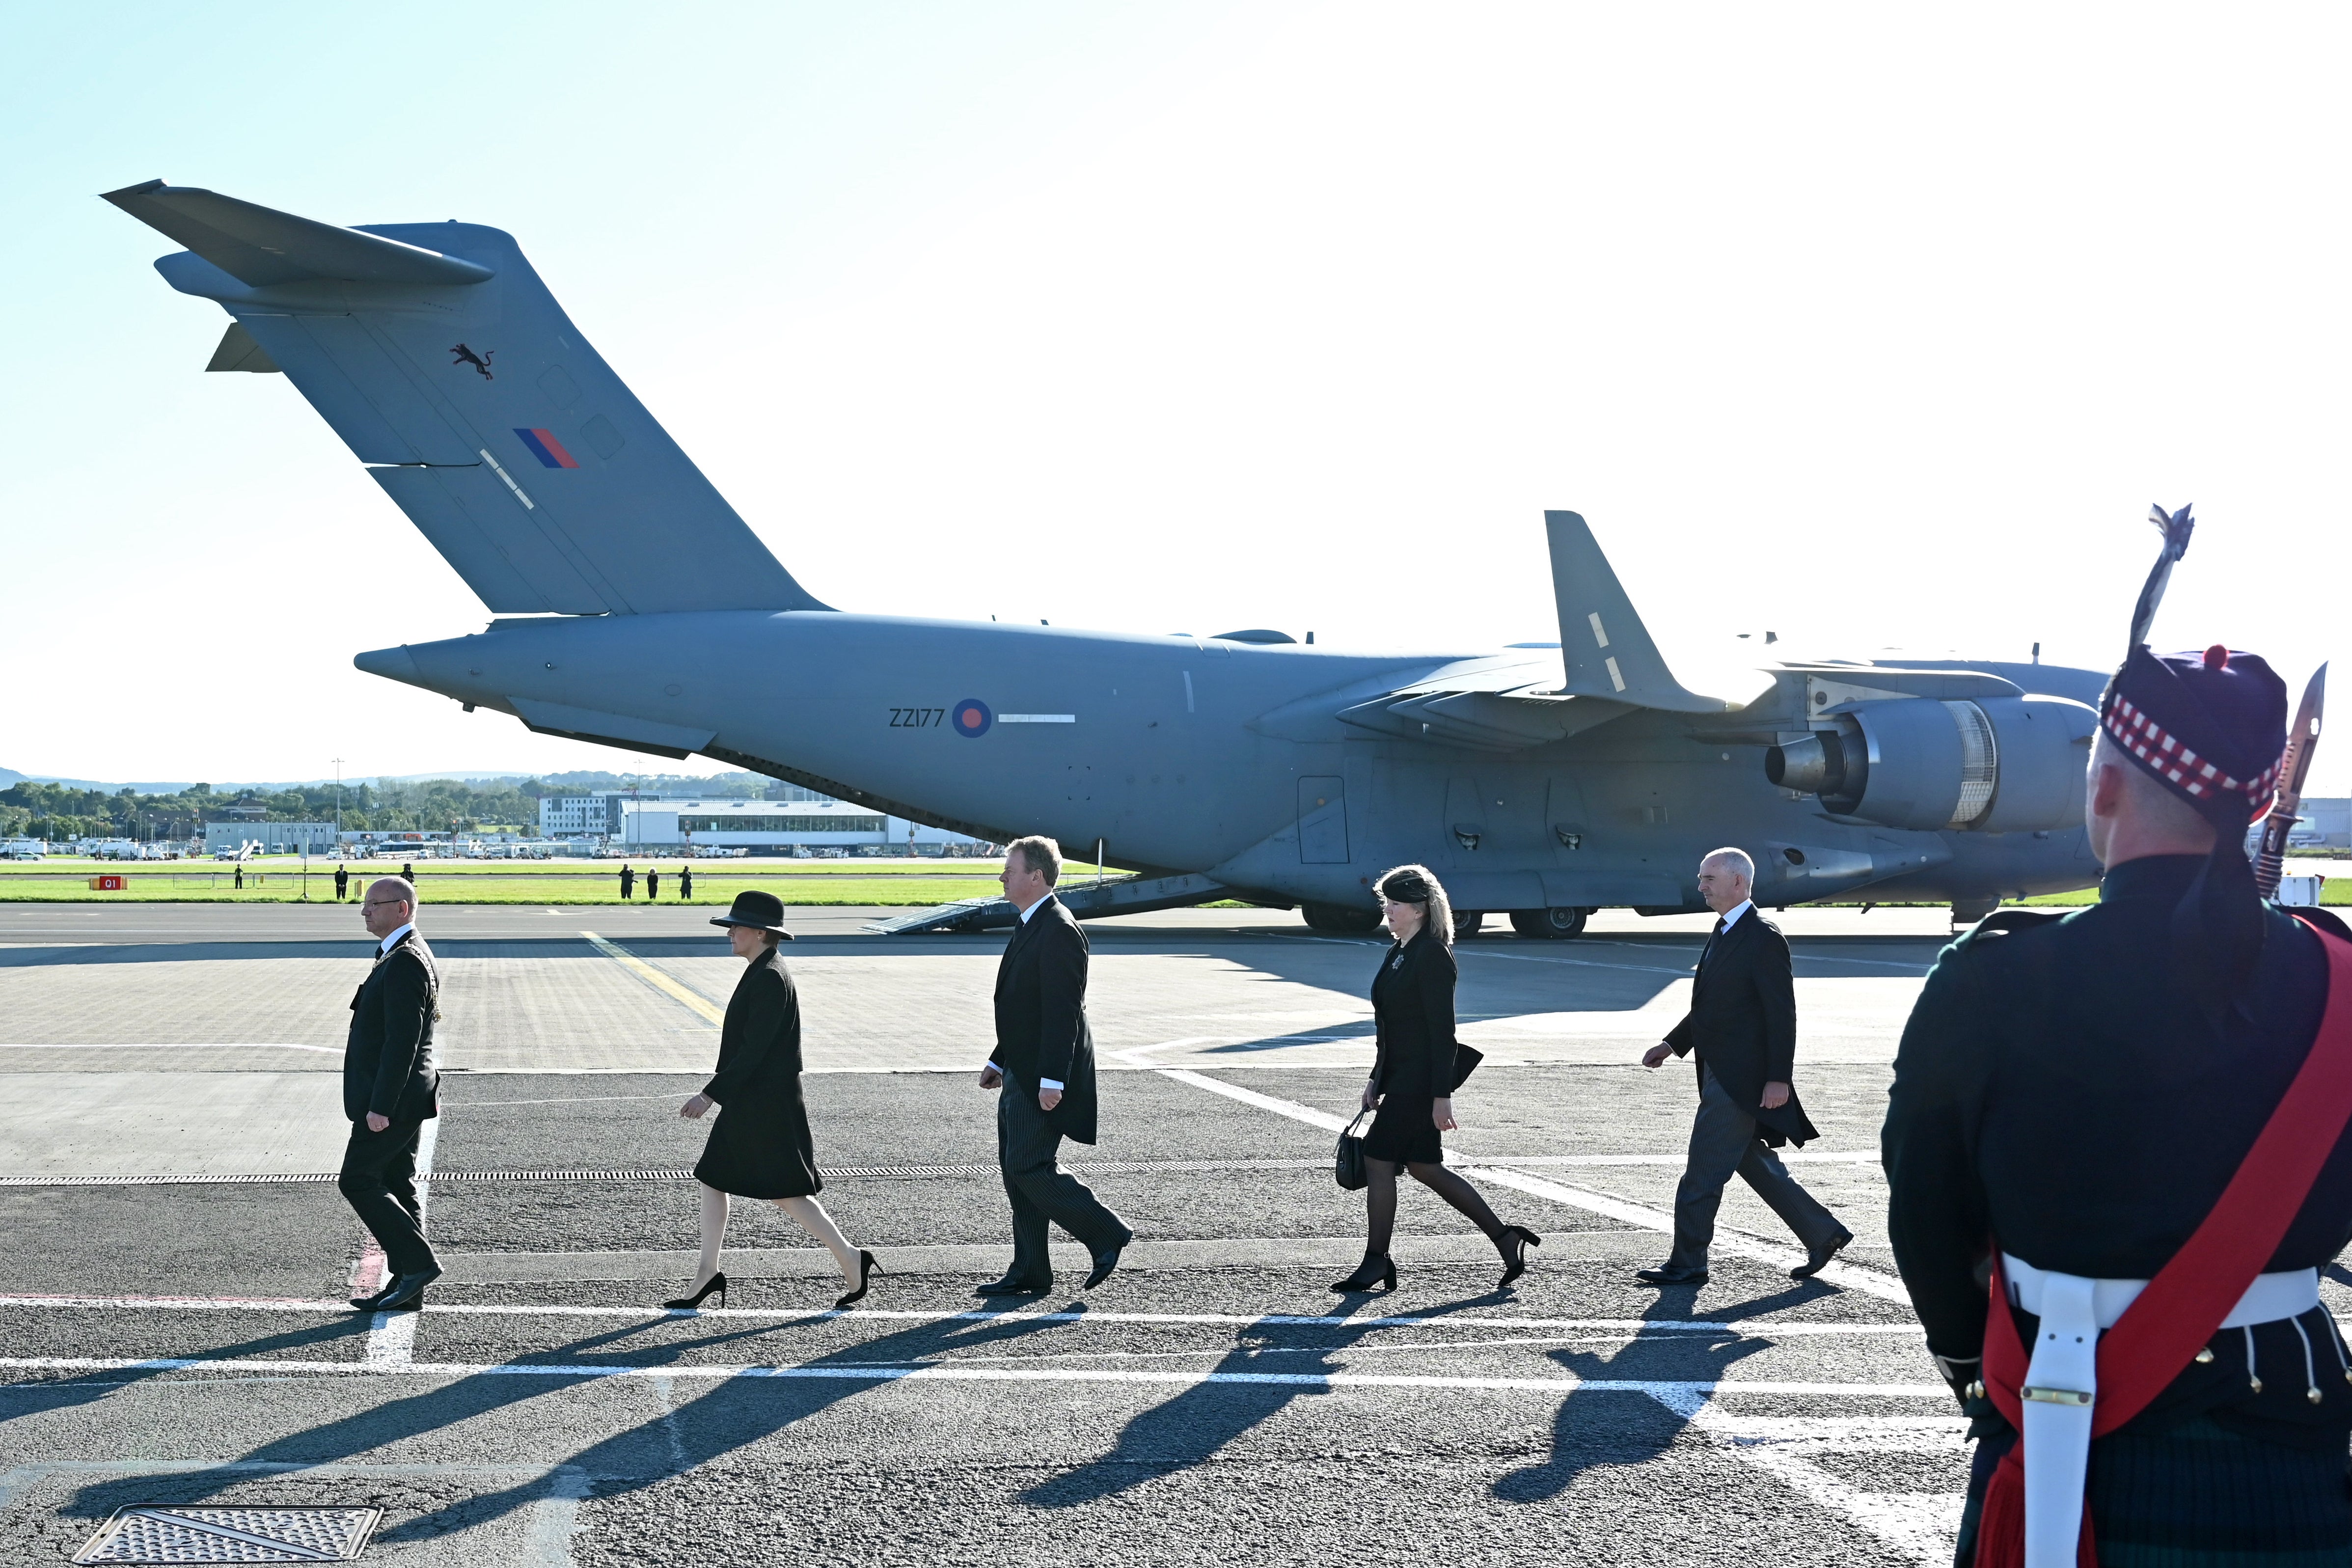 Dignitaries prepare for the arrival of the coffin of Queen Elizabeth II at Edinburgh Airport (PA)